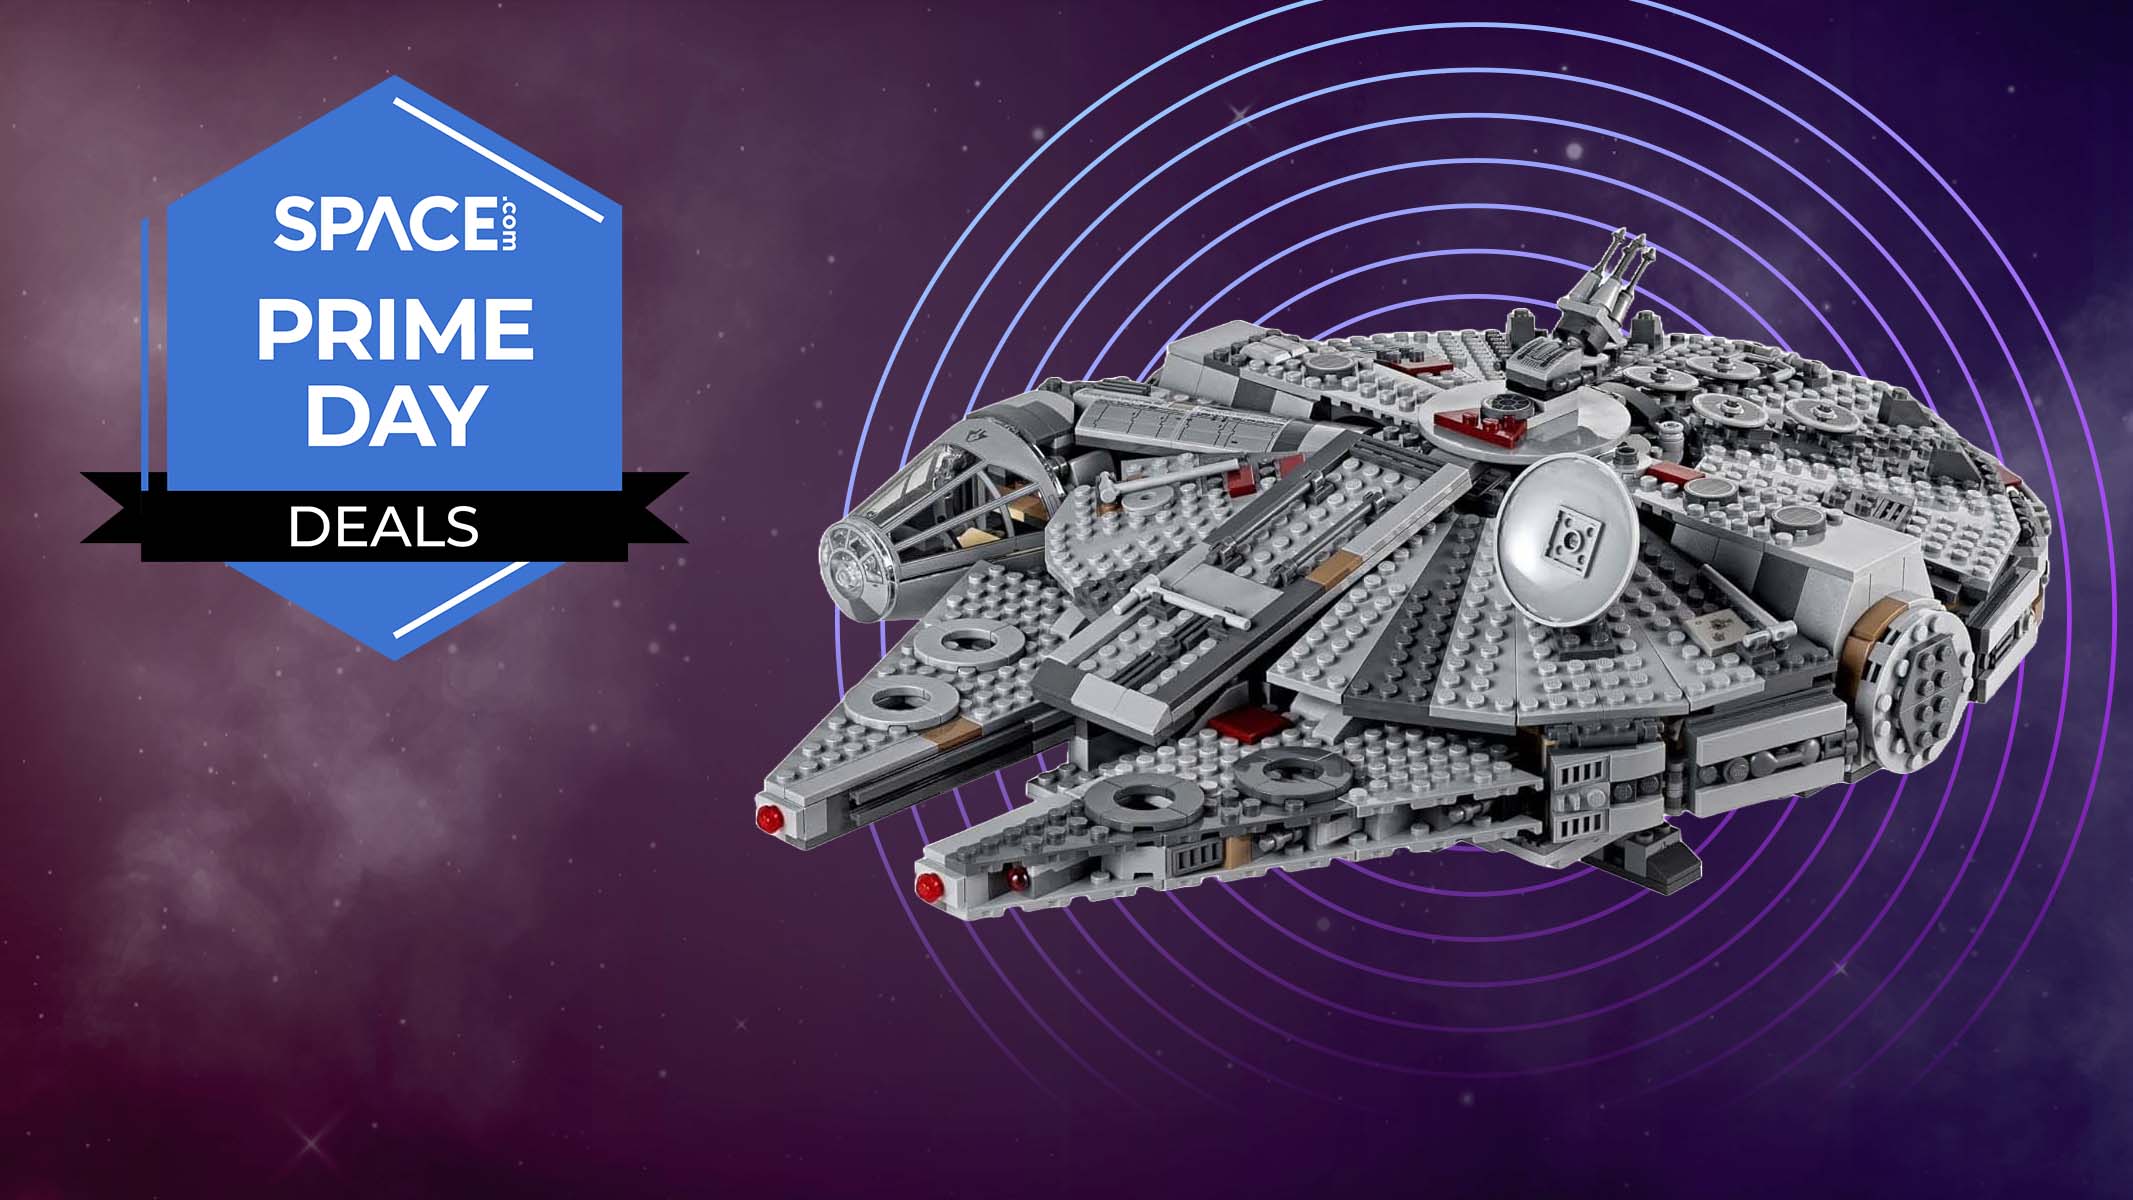  This awesome Lego Star Wars Millennium Falcon set is $34 off this Prime Day 